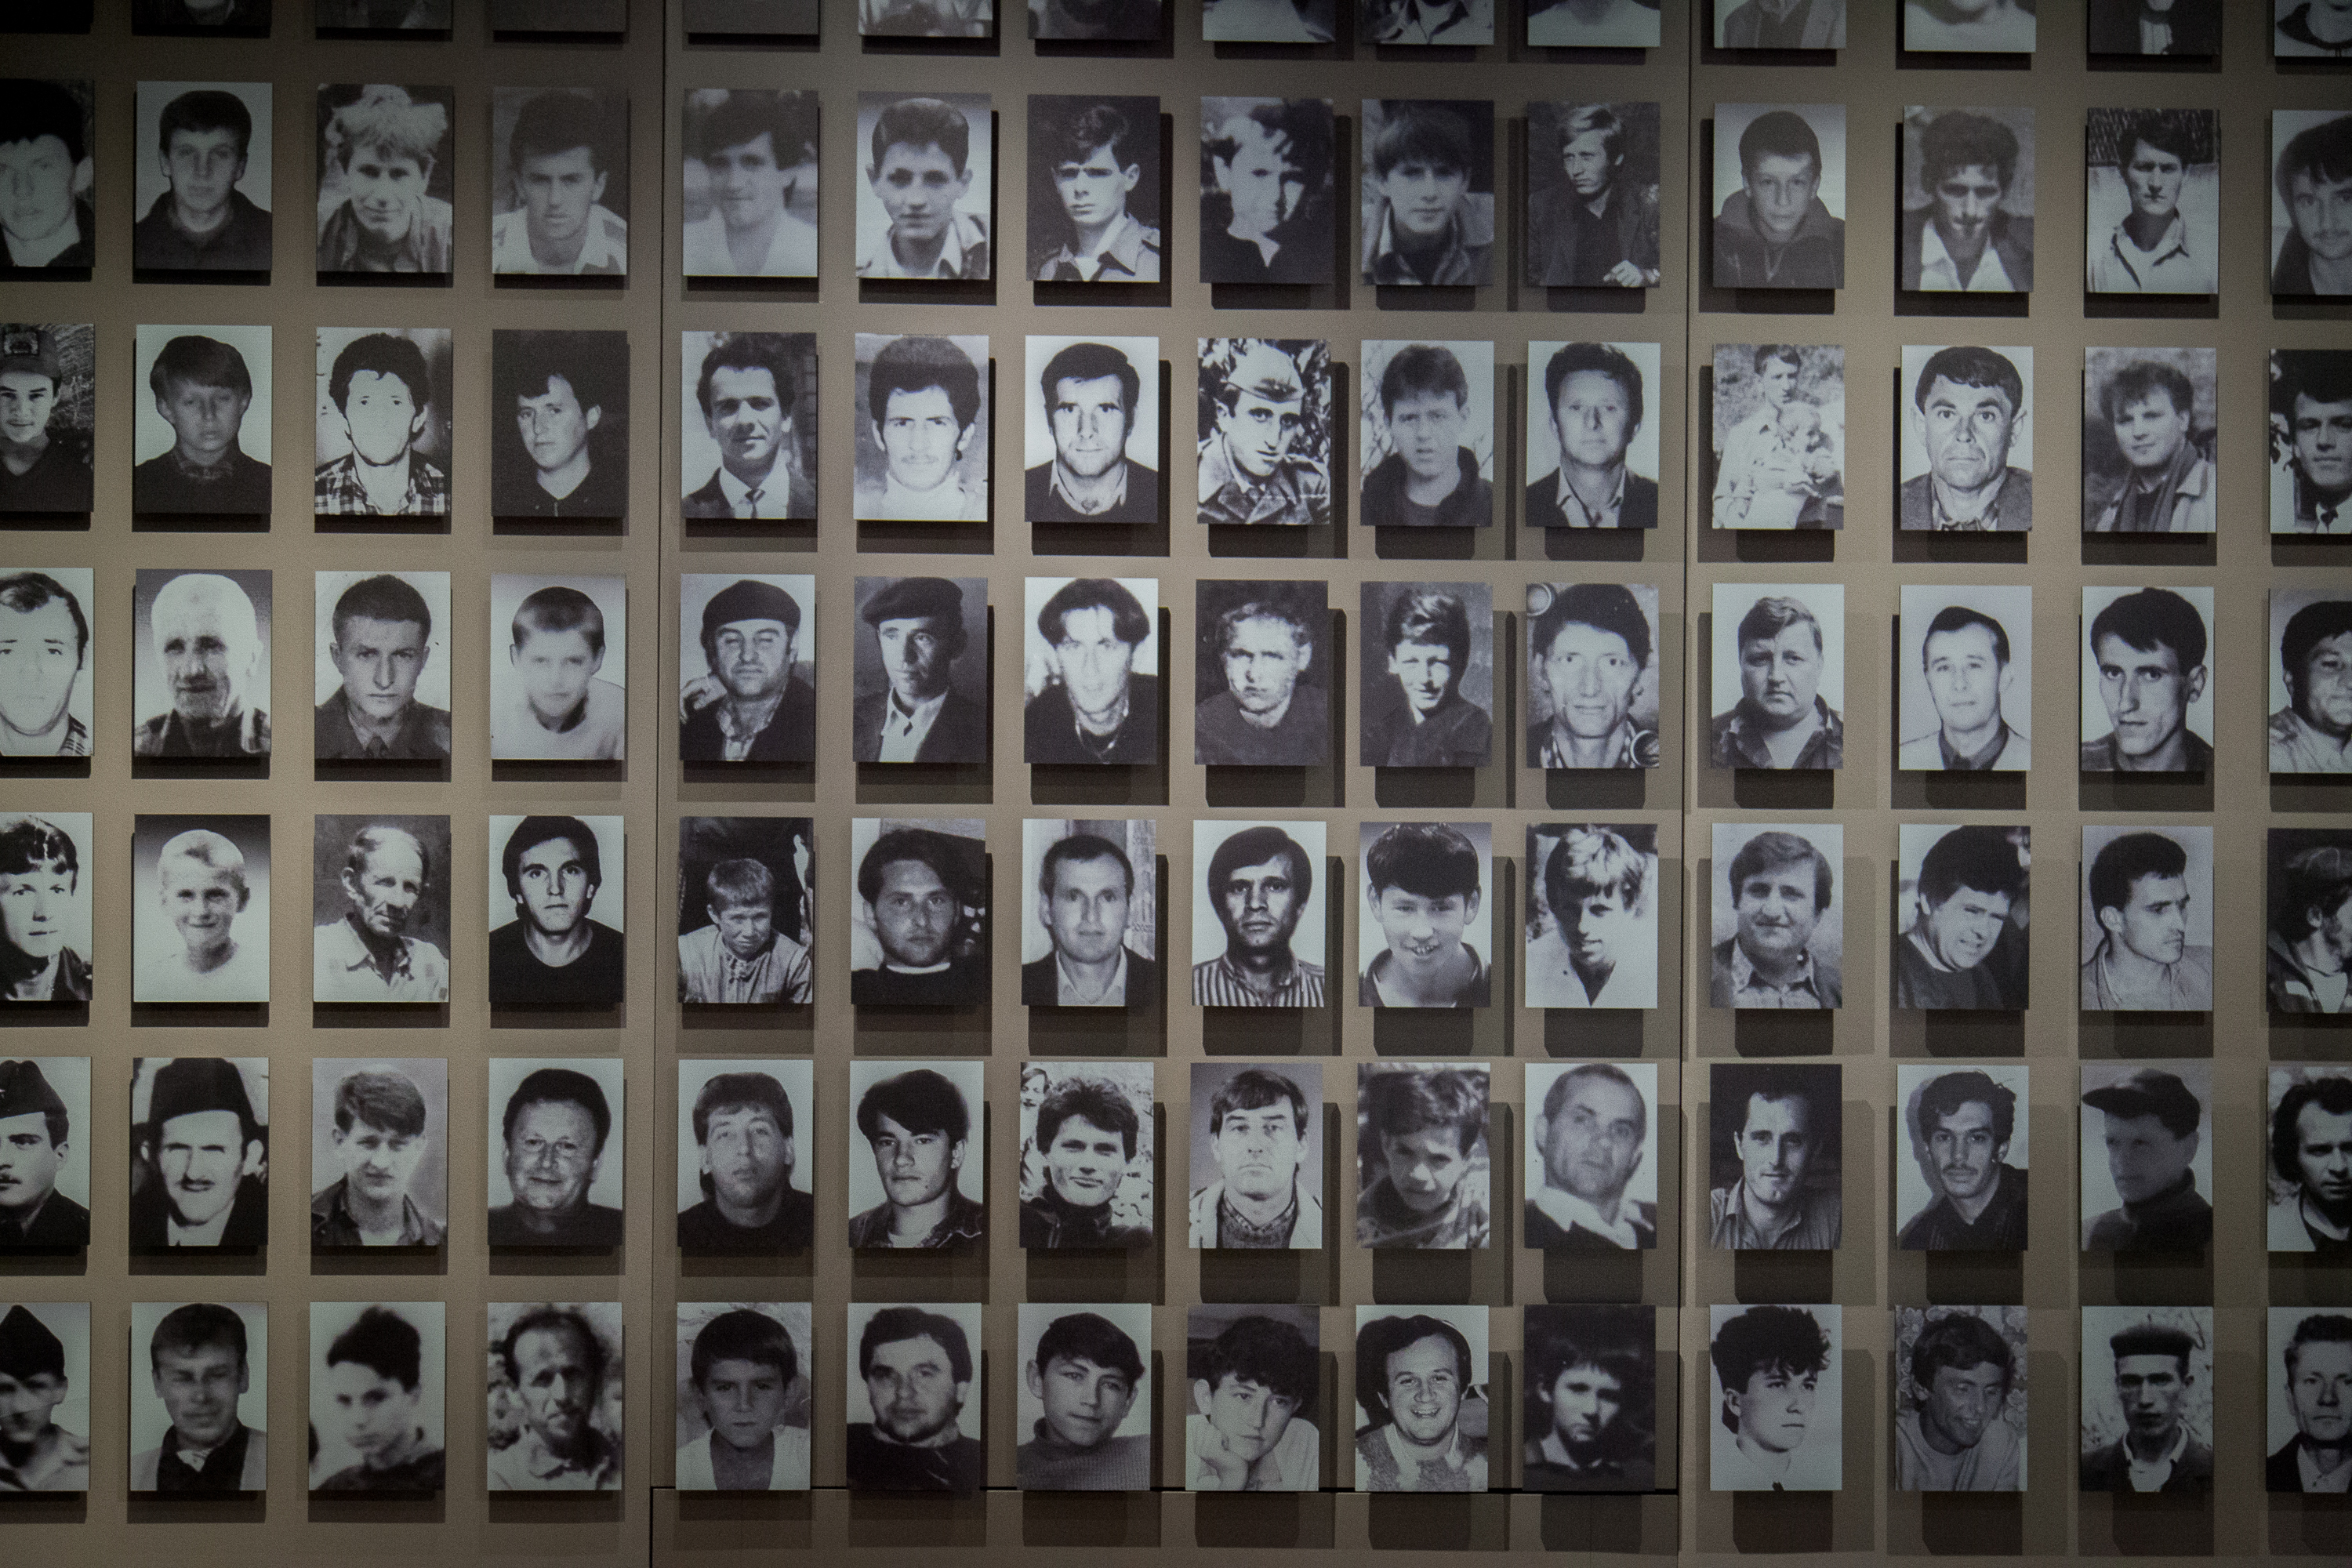 Wand mit Porträts der Opfer in der Galerie 11/07/95 in Sarajevo. / Wall with portraits of victims from the 1995 Srebrenica genocide at the Galerija 11/07/95 in Sarajevo.